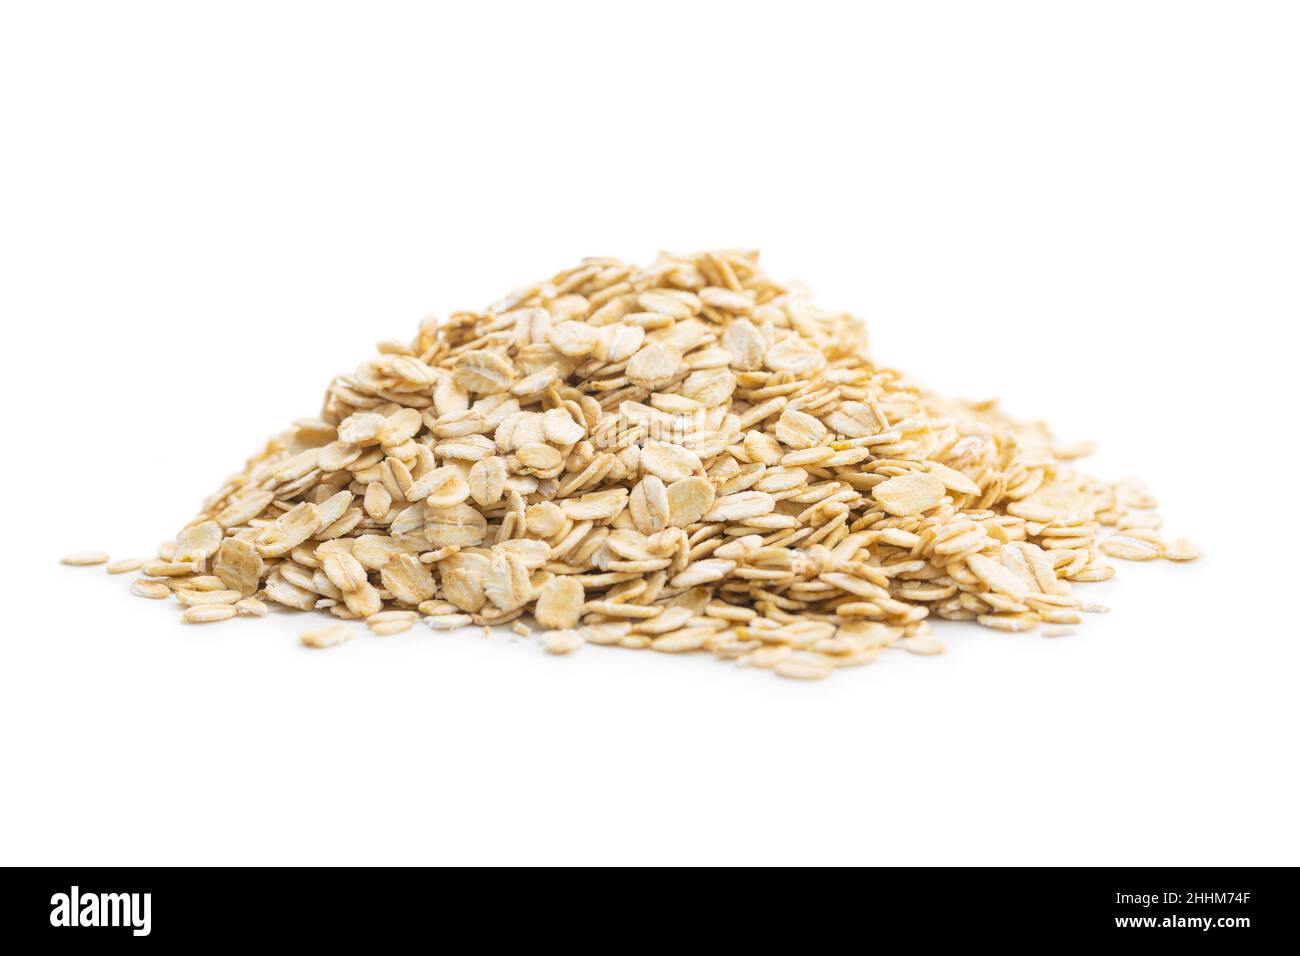 Breakfast cereals. Uncooked oatmeal. Raw oat flakes isolated on white background. Stock Photo